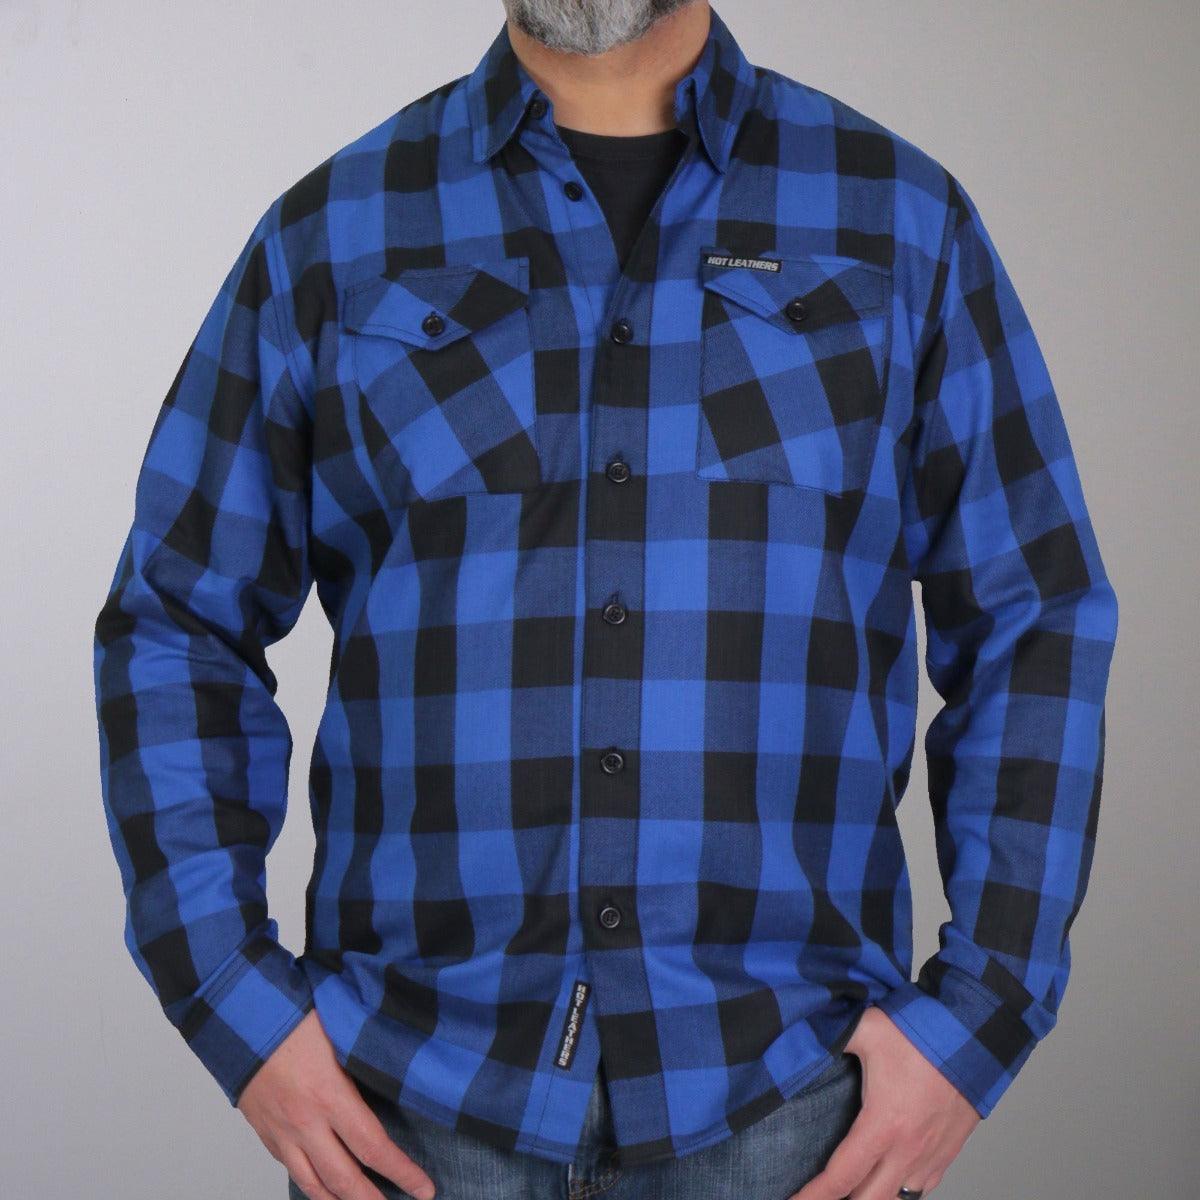 Hot Leathers Men's Black And Blue Long Sleeve Flannel - American Legend Rider